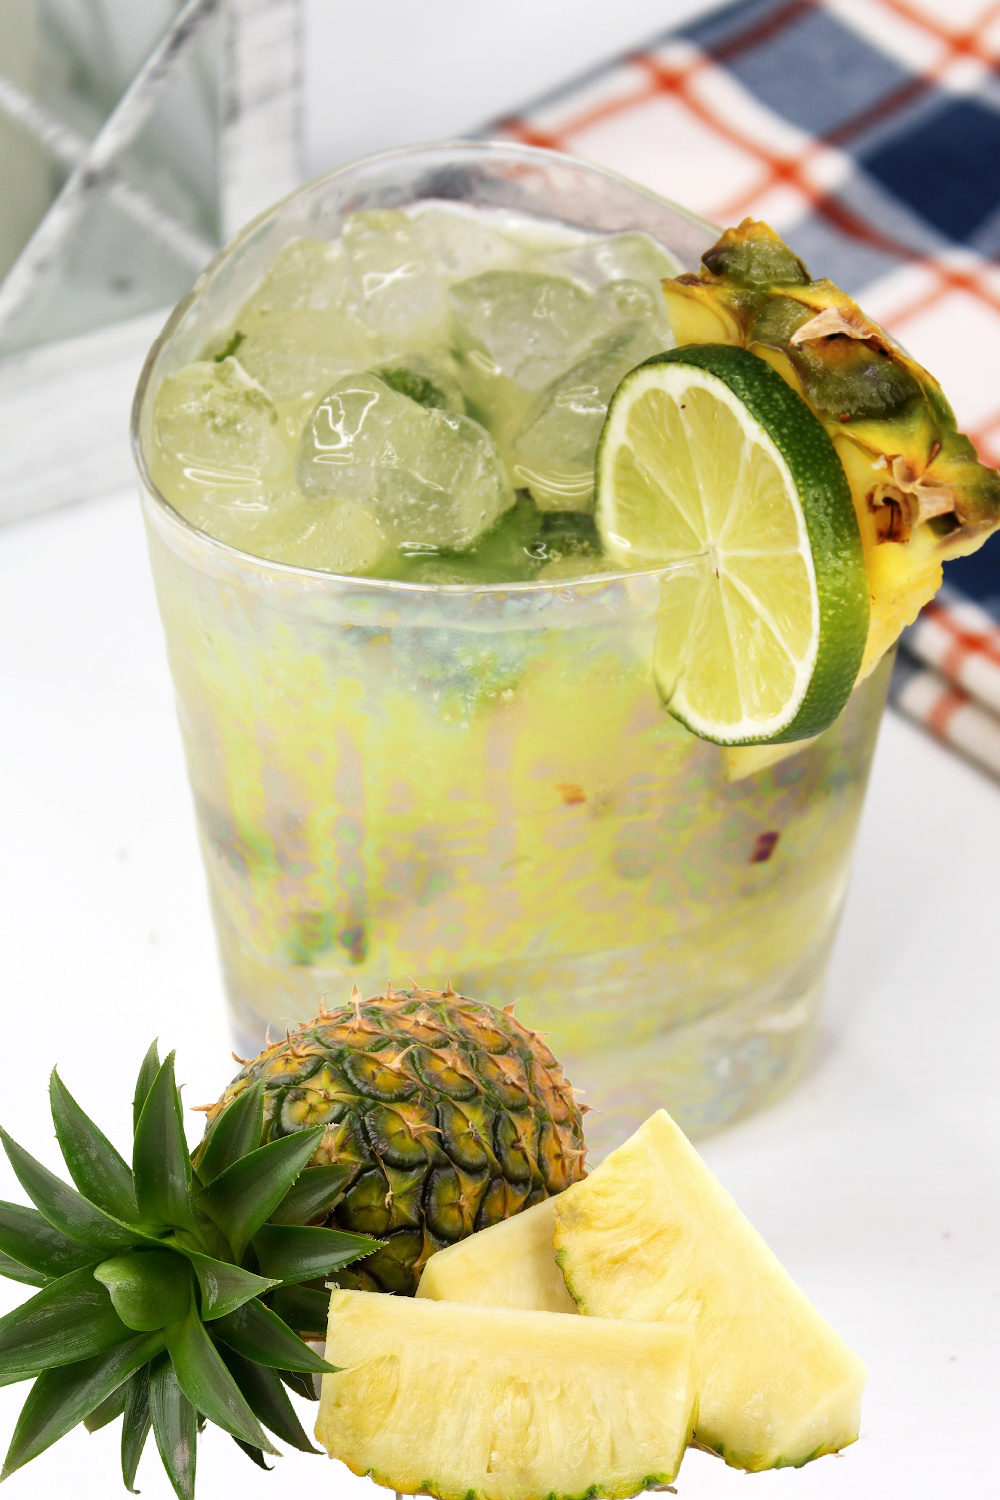 This pineapple mojito is garnished with a slice of lime and fresh pineapple. Also, in the photo is a whole pineapple and additional pineapple chunks.